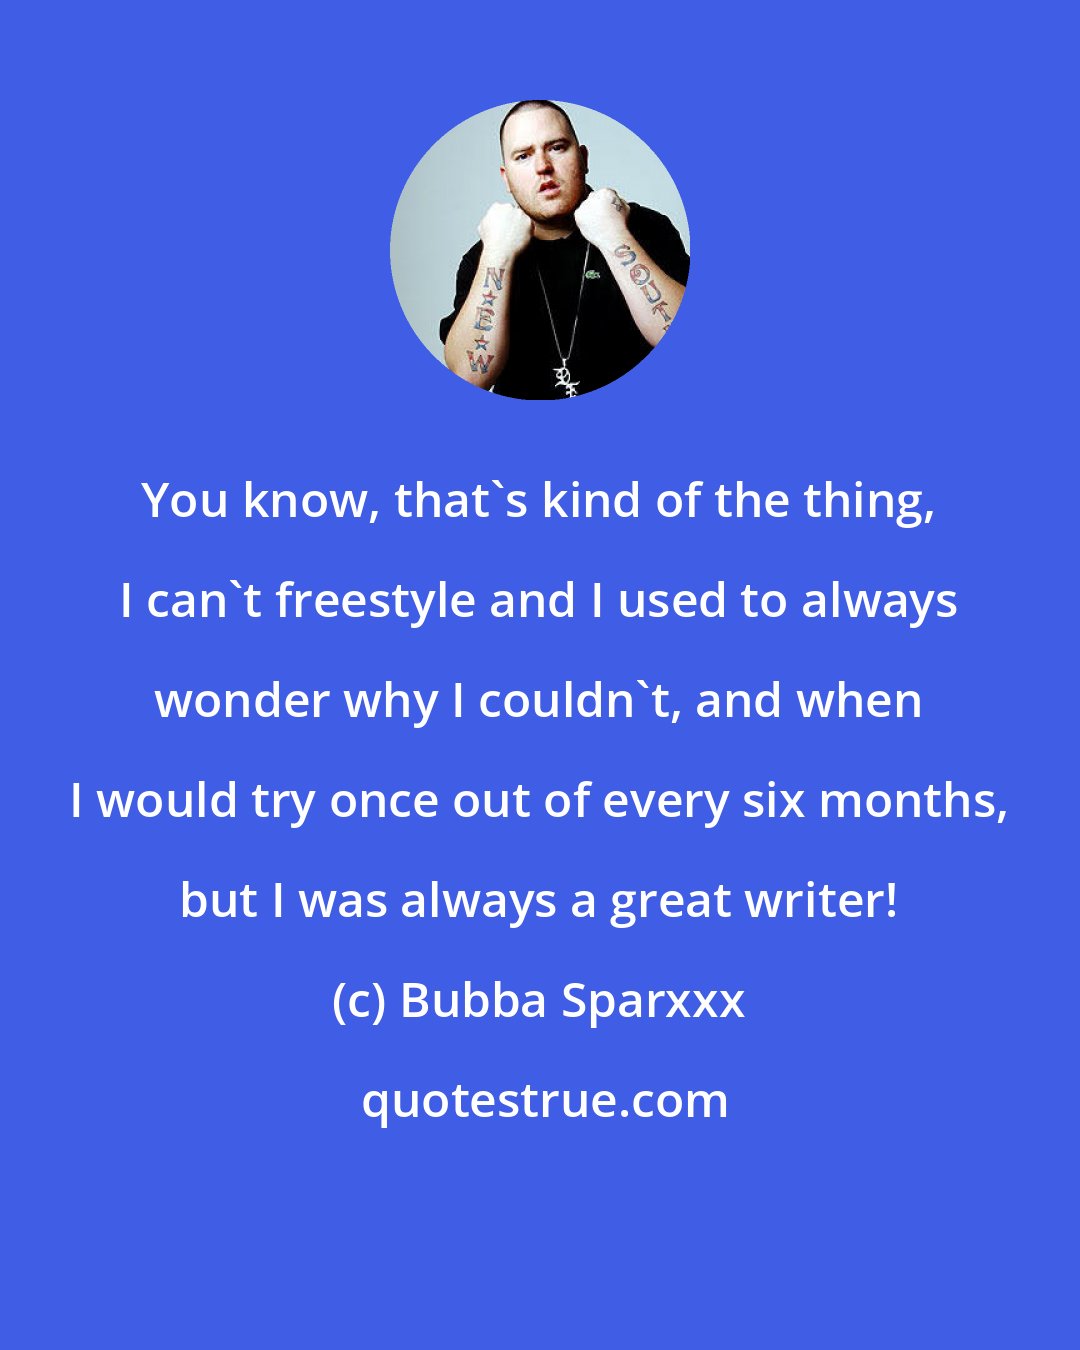 Bubba Sparxxx: You know, that's kind of the thing, I can't freestyle and I used to always wonder why I couldn't, and when I would try once out of every six months, but I was always a great writer!